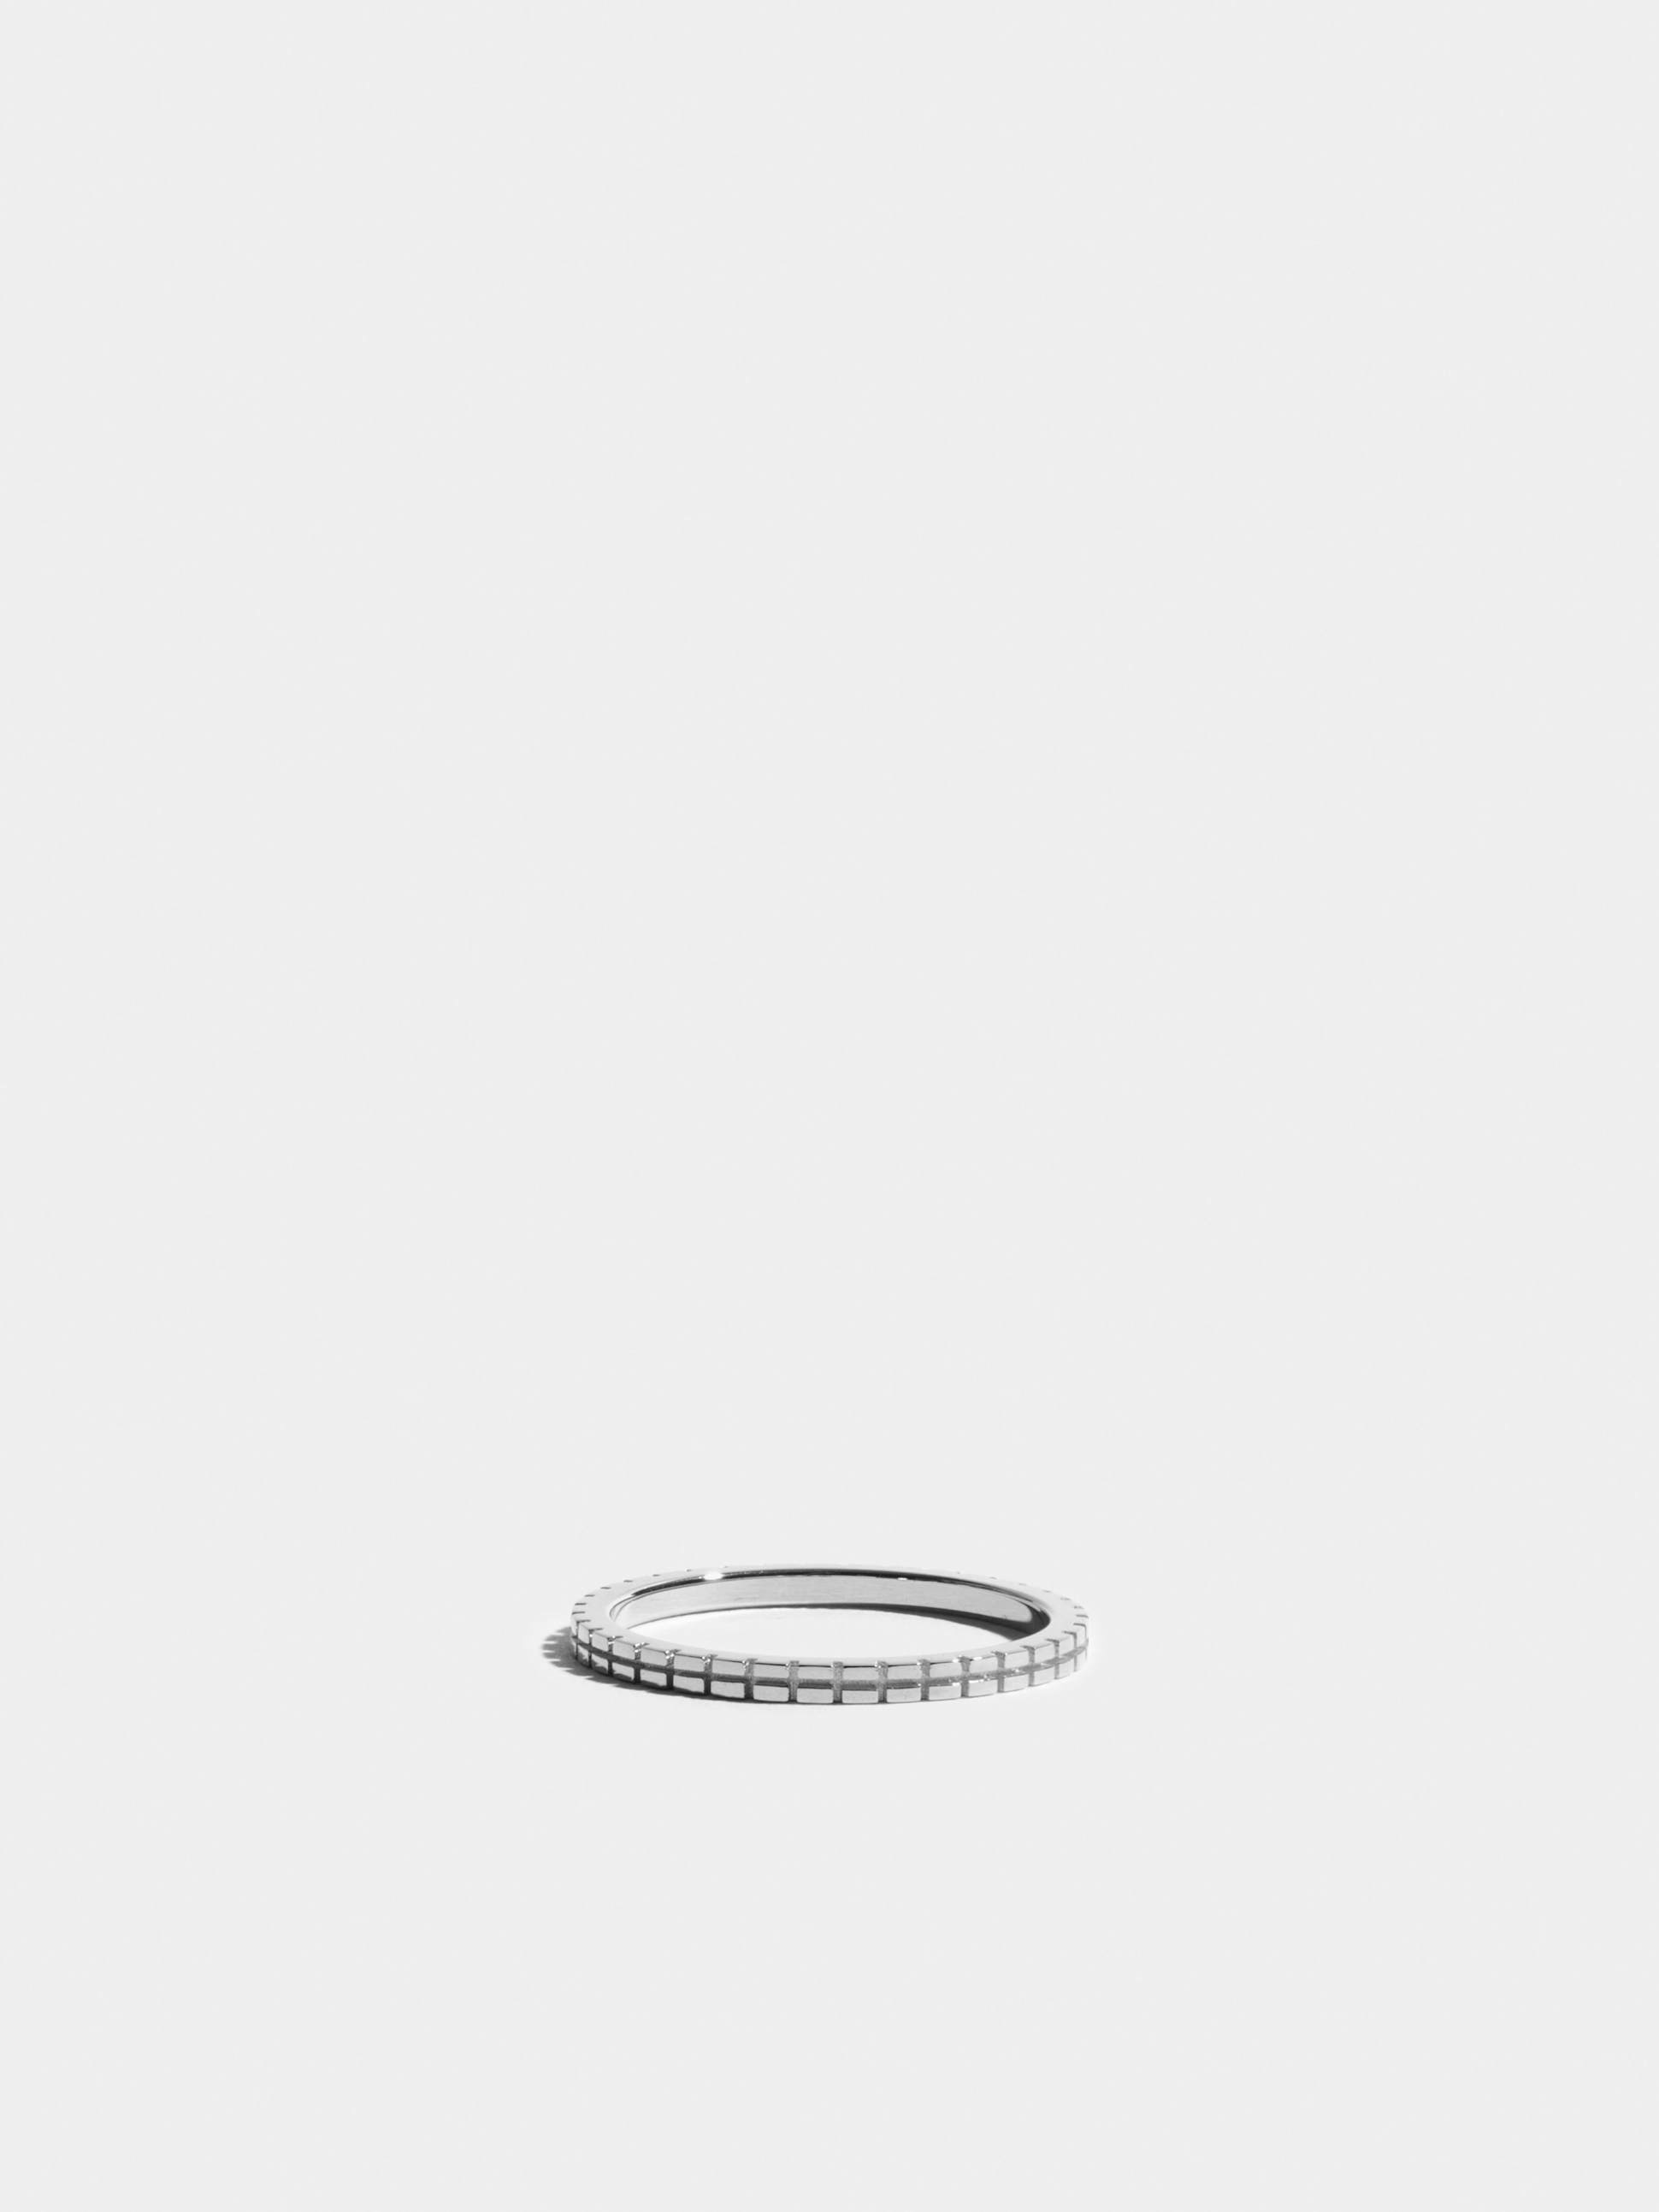 Anagramme "damier" ring in 18k Fairmined ethical white gold